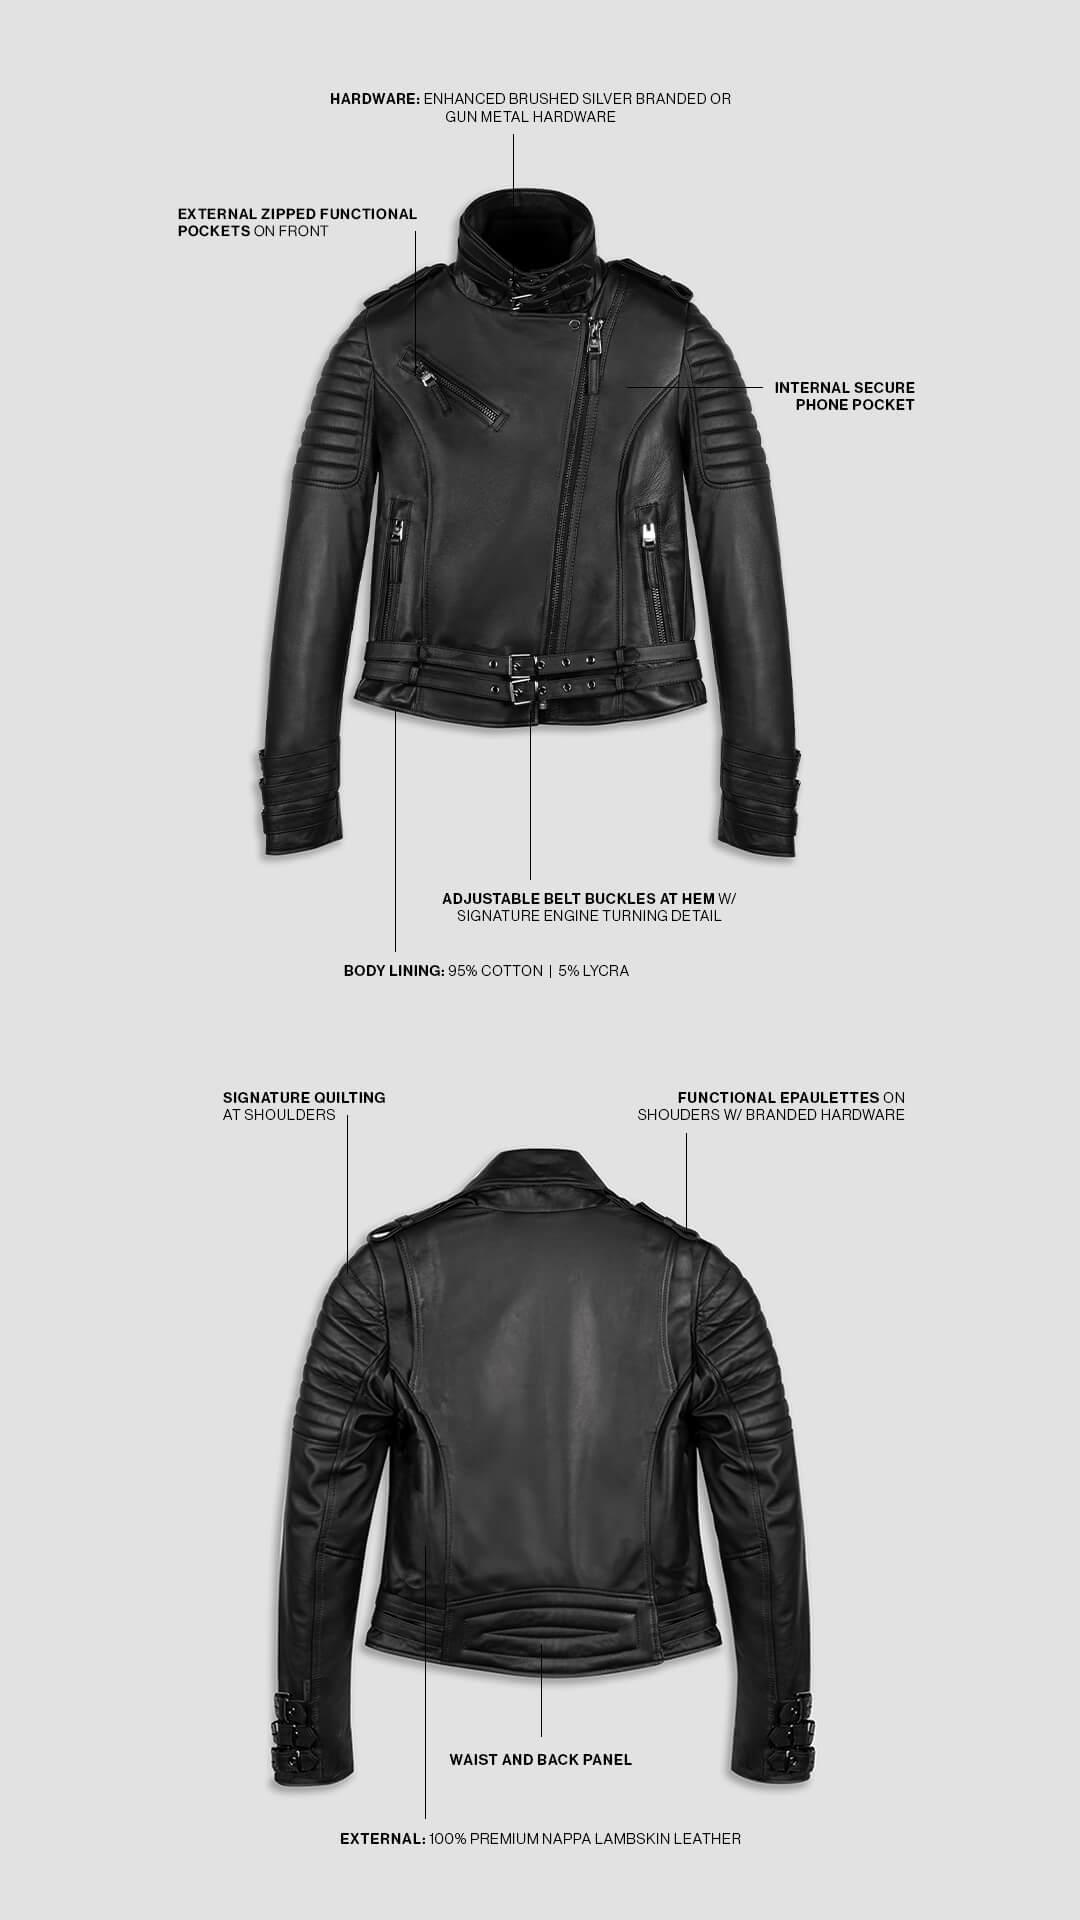 Jaws: Women's Gunmetal Leather Jacket with Buckles in Black | BODA SKINS